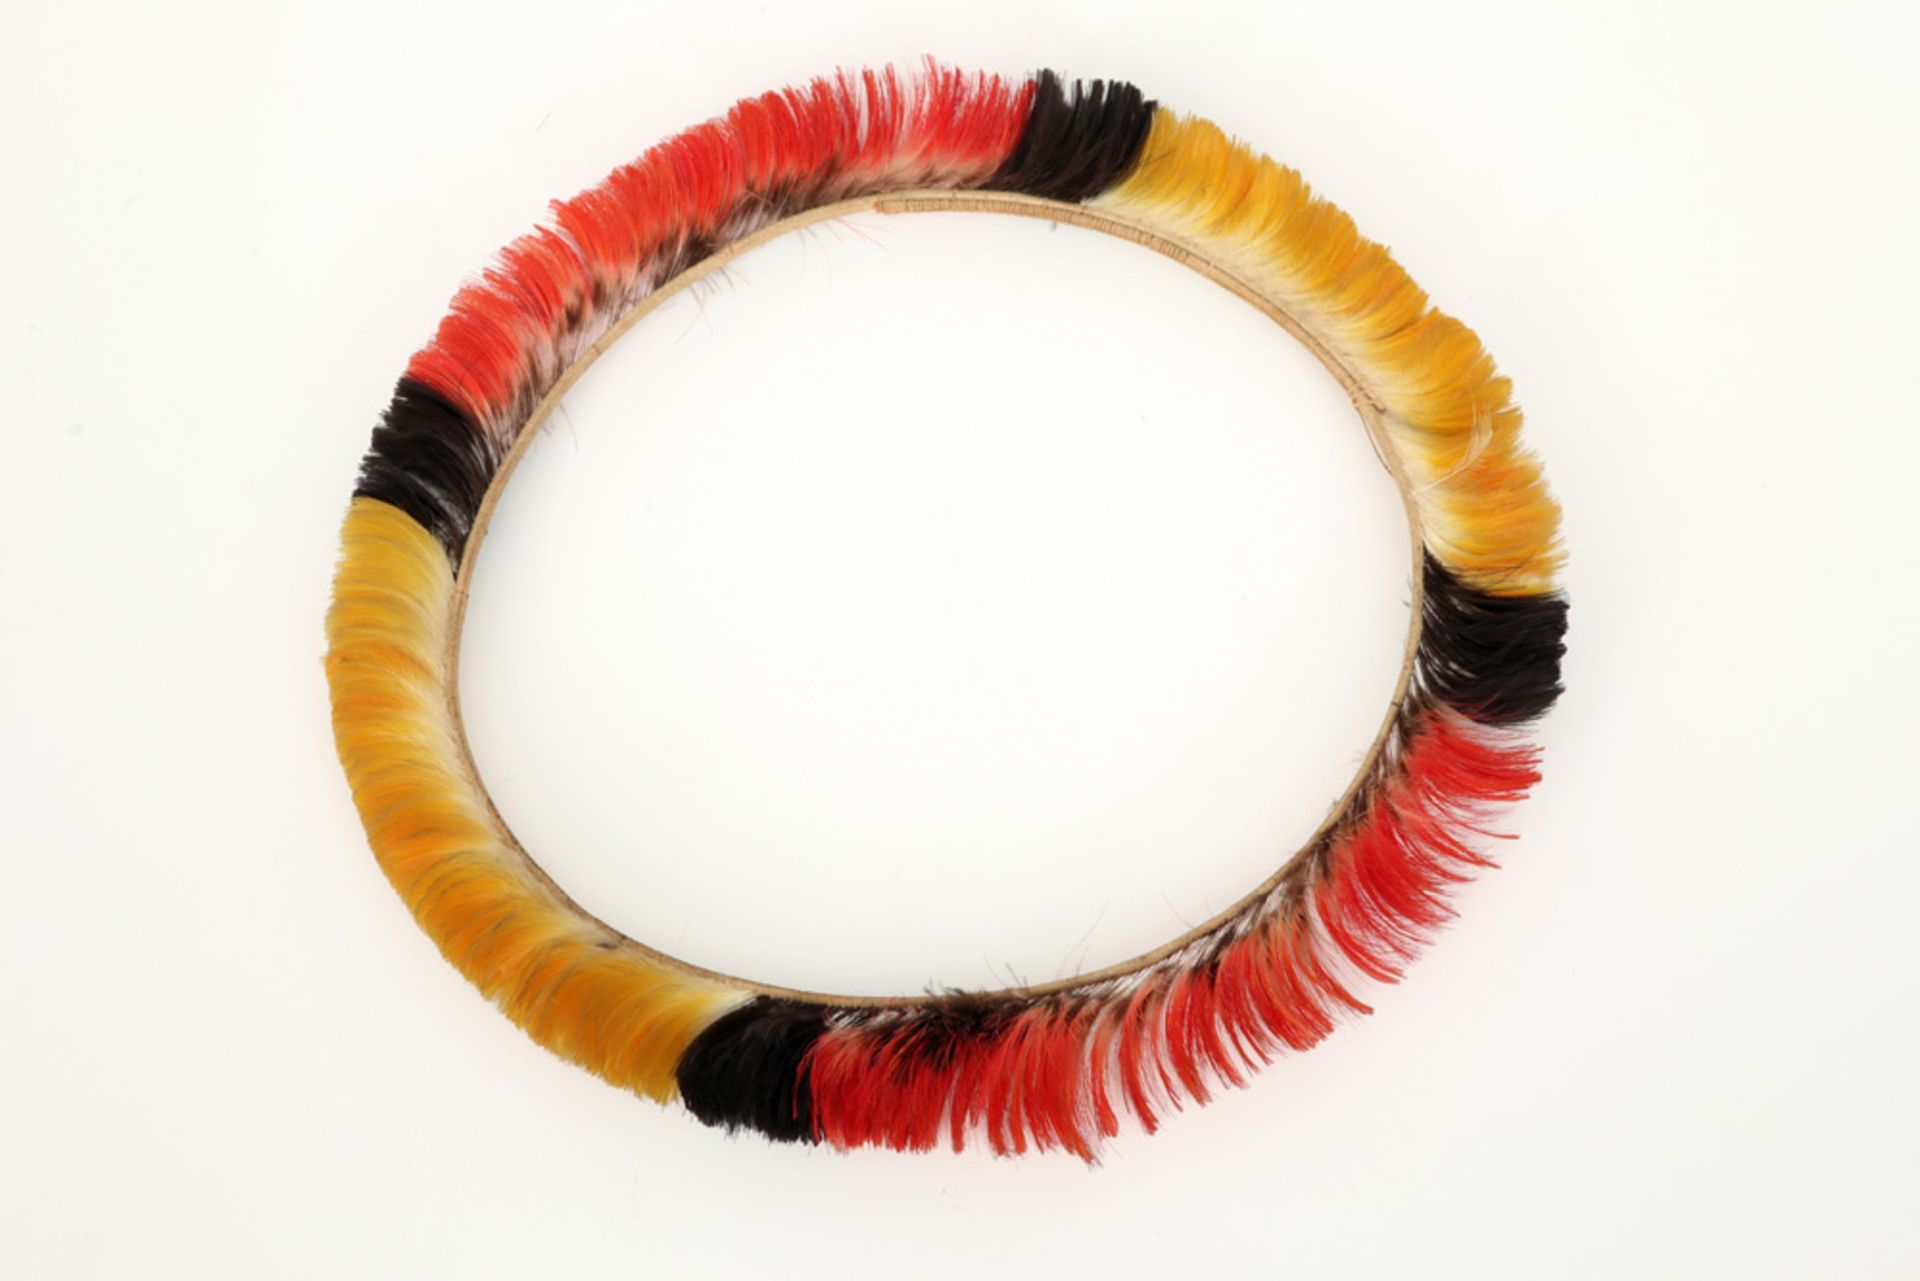 ethnic headband of the Wayana - Indians made of colorful feathers - Image 2 of 2